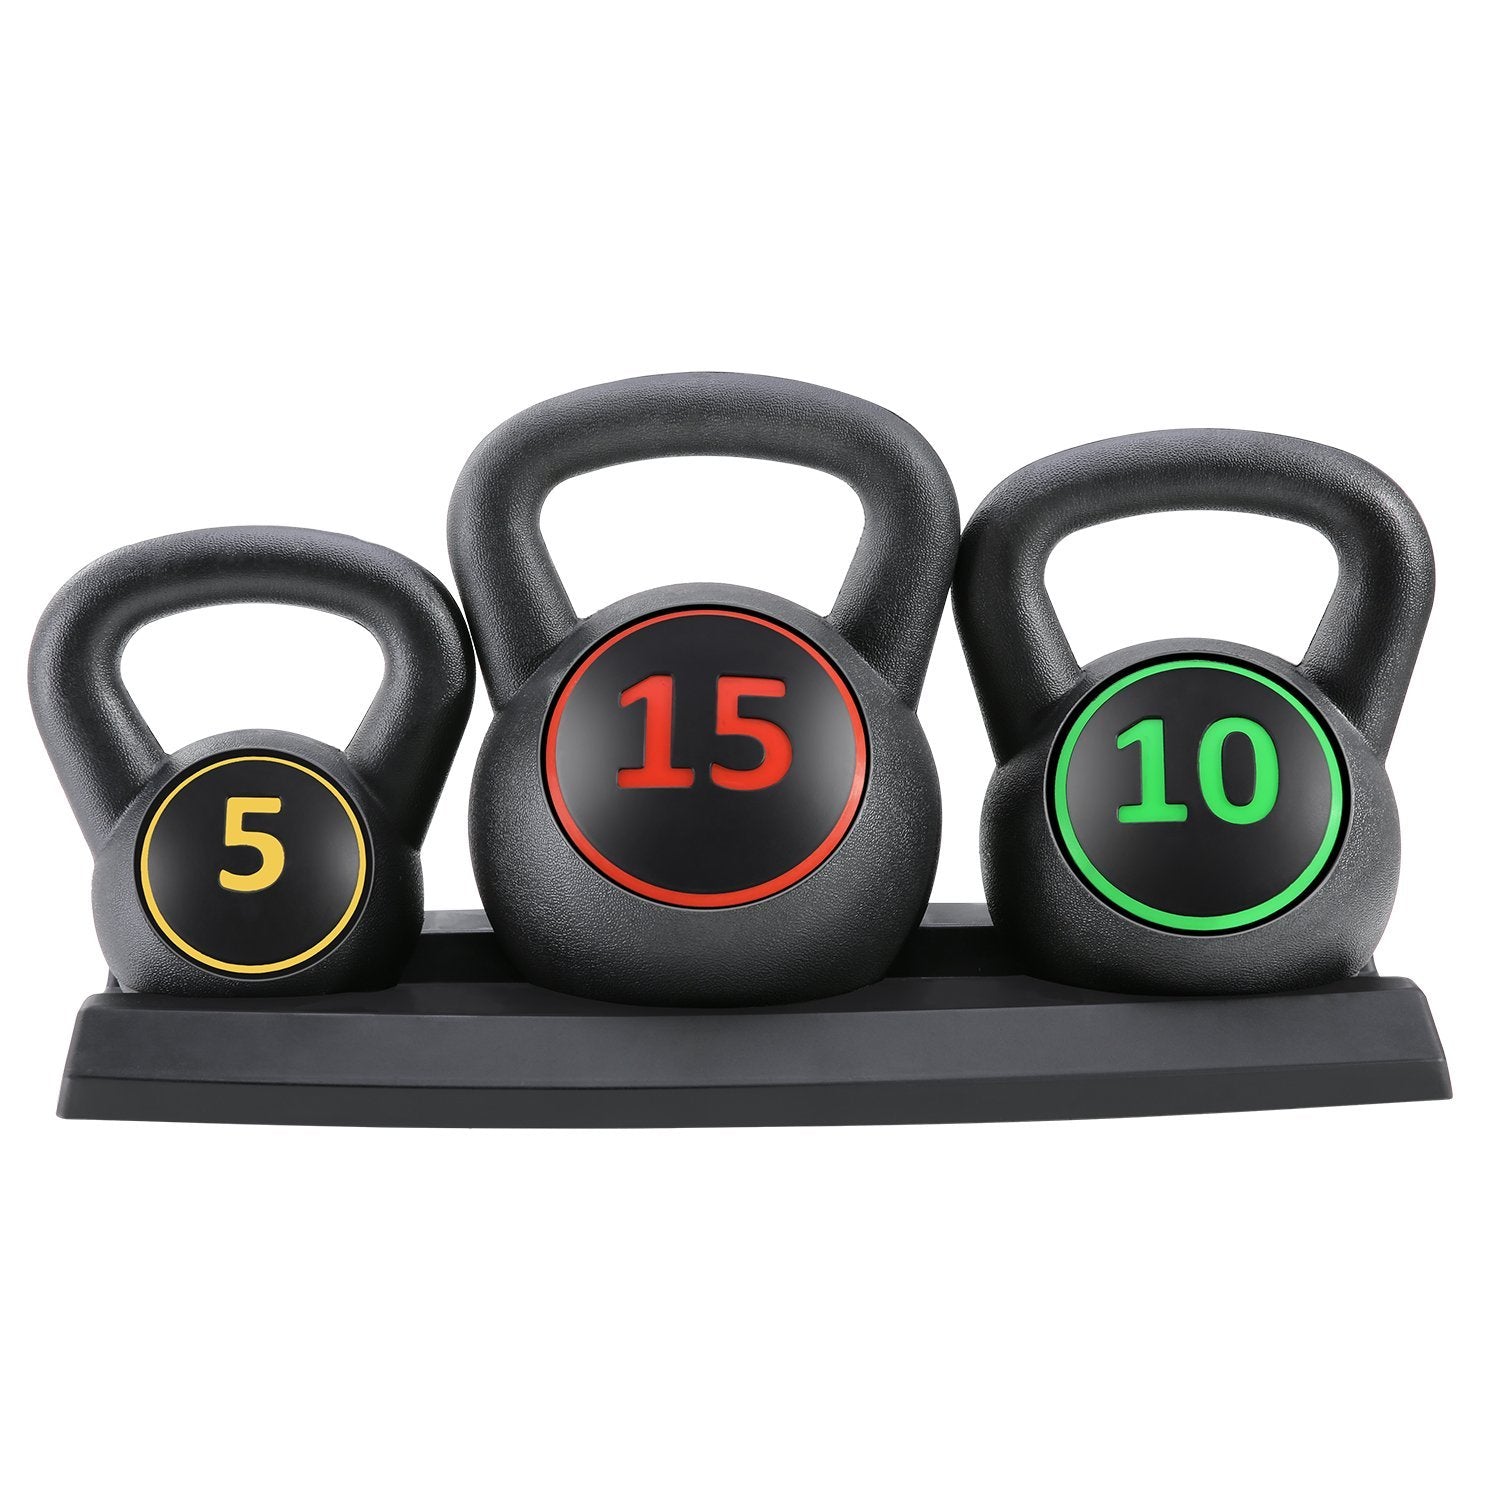 MaxKare Kettlebell Set 3-Piece Wide Handle HDPE Coated 5lb 10lb 15lb Weights Kettlebells with Storage Rack Exercise Fitness for Strength Training Home Gym 